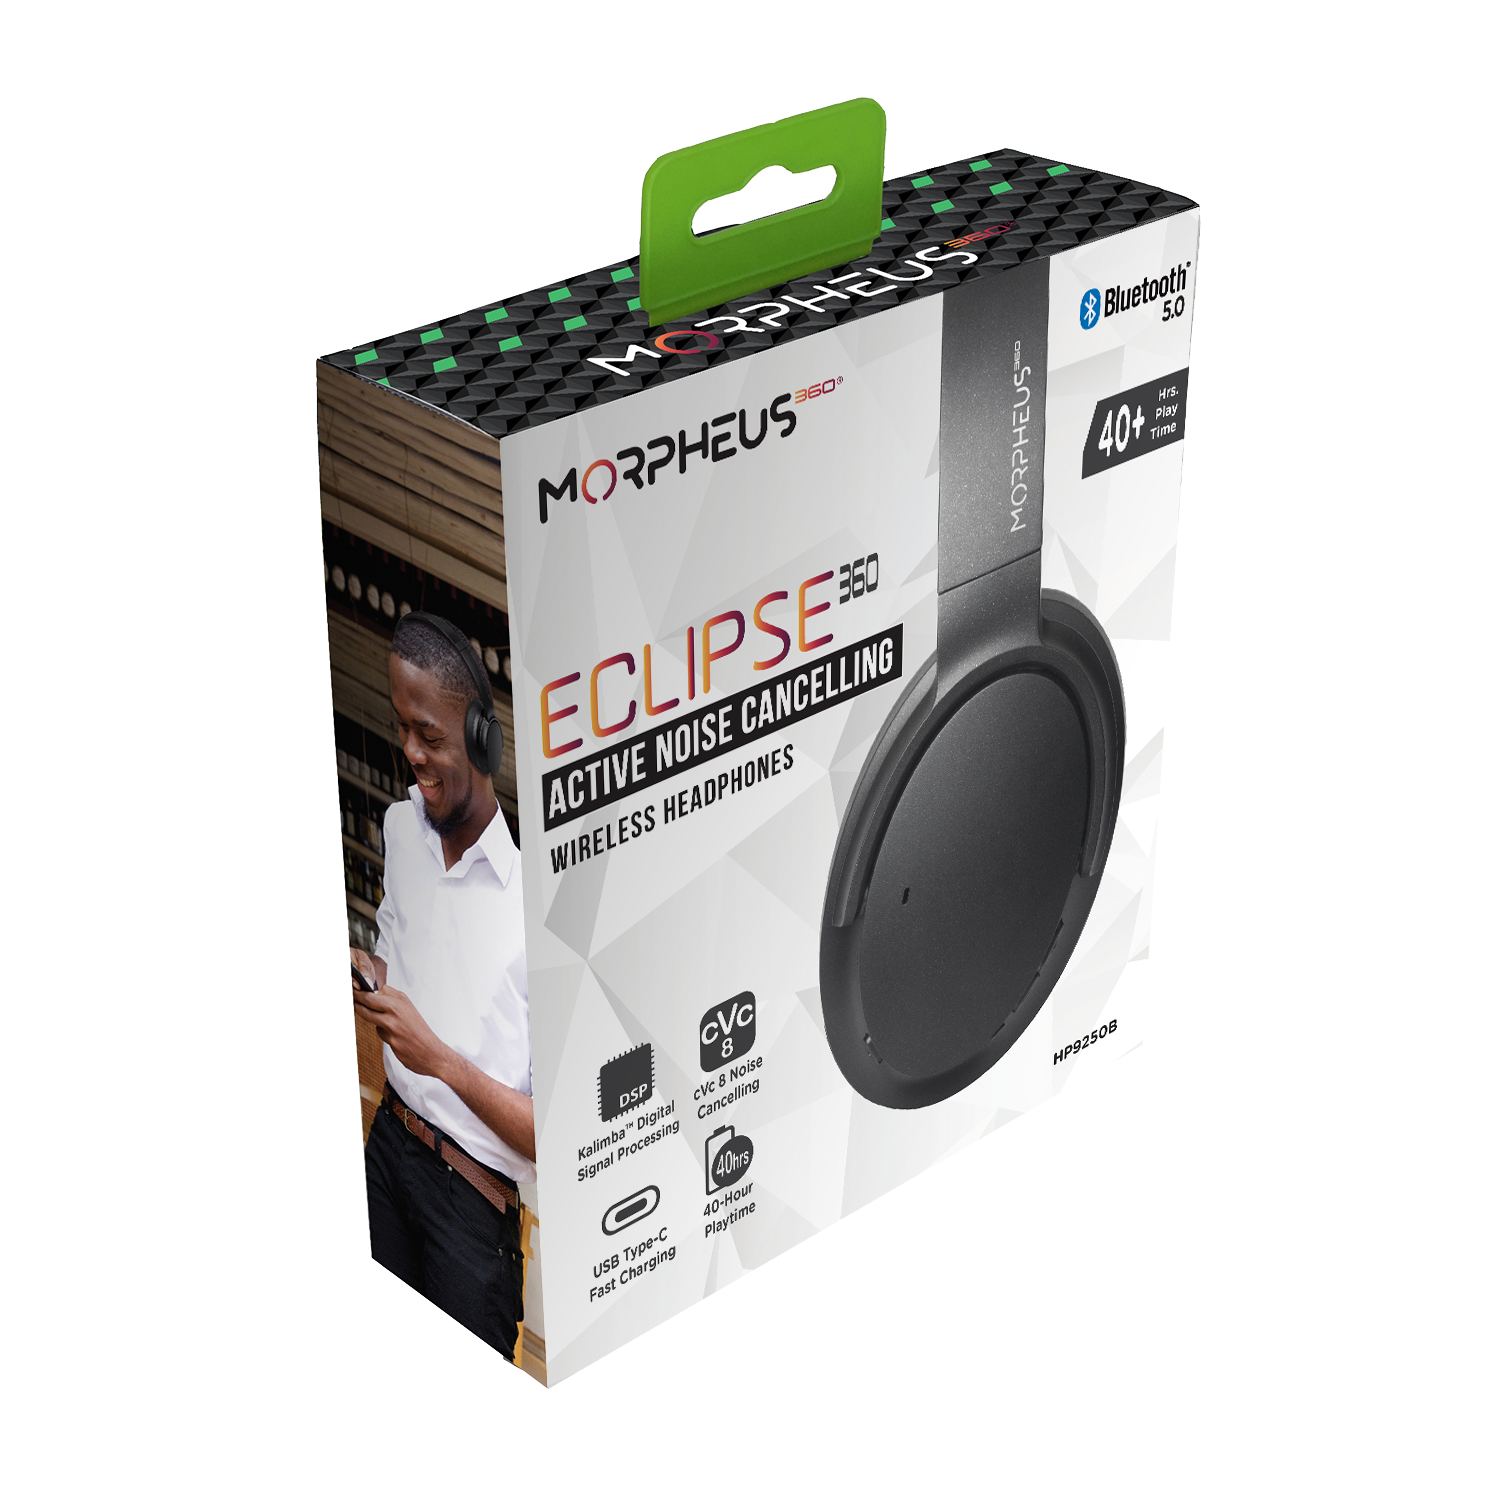 Photo of Morpheus 360 Eclipse 360 Wireless Headphones Retail packaging. The front of the retail packaging displays the side view of the Eclipse 360 headphones, as well as, Bluetooth 5.0, 40+ hours playtime, Kalimba Digital Signal Processing, cVc 8 Noise cancelling, and USB Type-C Fast Charging features. 